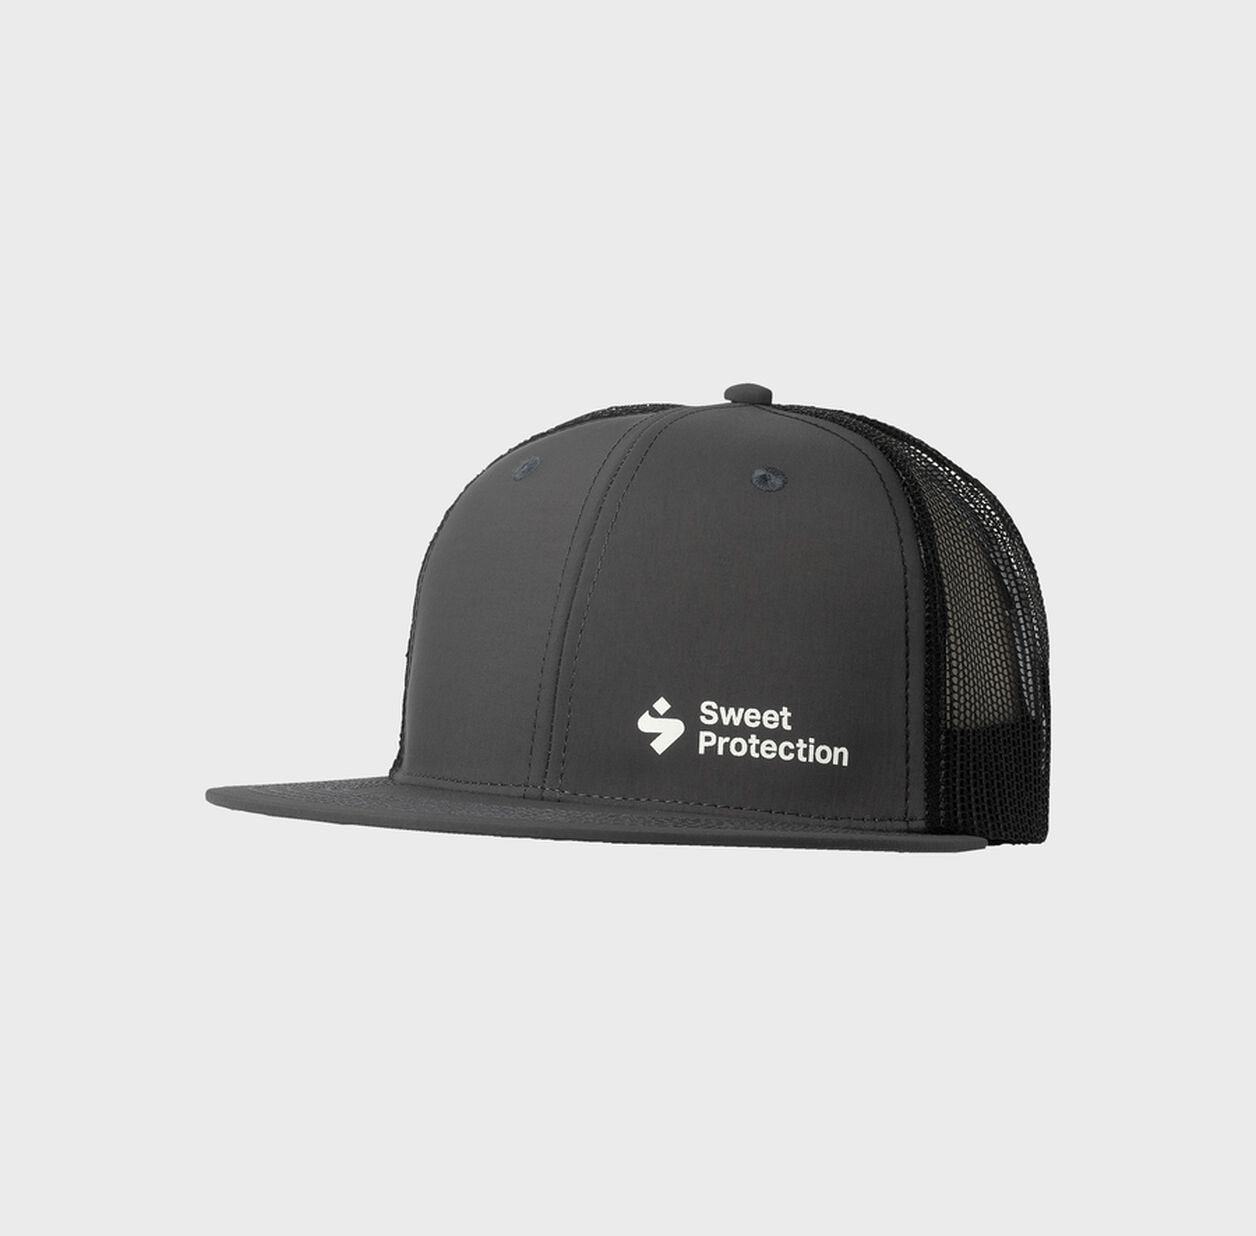 Sweet Protection - Casquette Trucker Corporate Casquettes Sweet Protection 